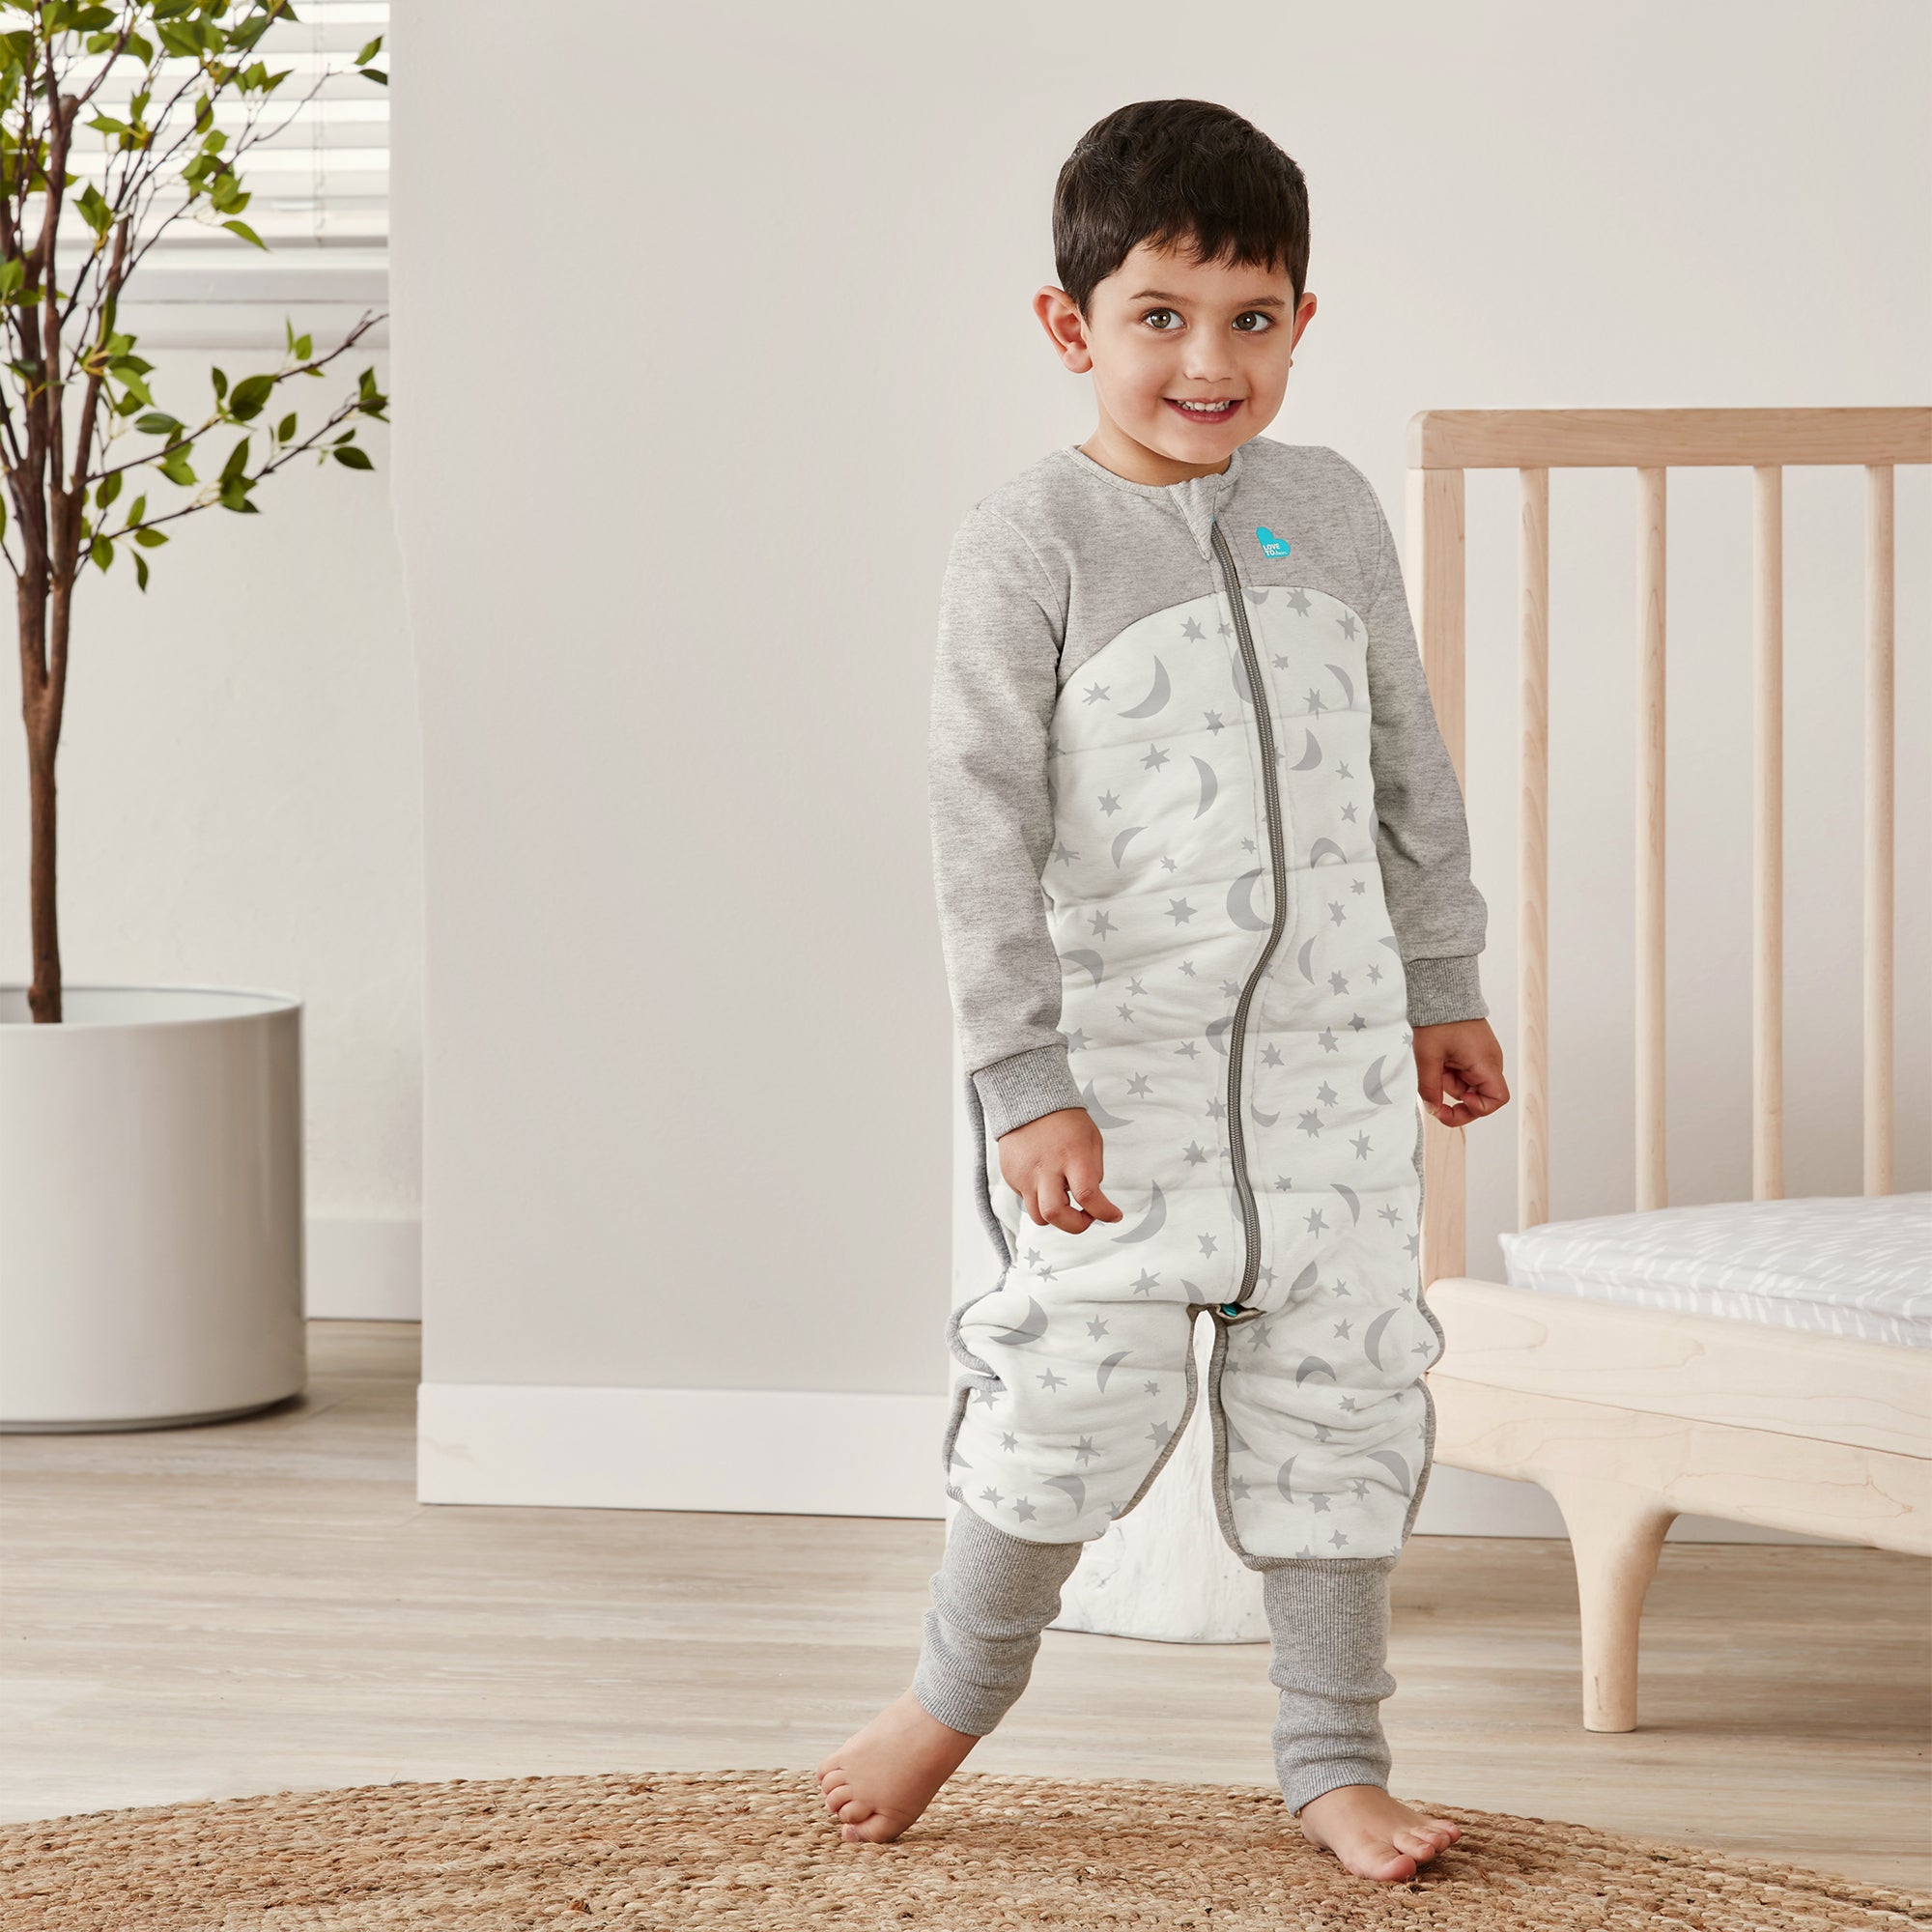 Sleep Suit Quilted Cotton 2.5 TOG Moonlight White Size 0 (Stage 3) - Tiny Tots Baby Store 